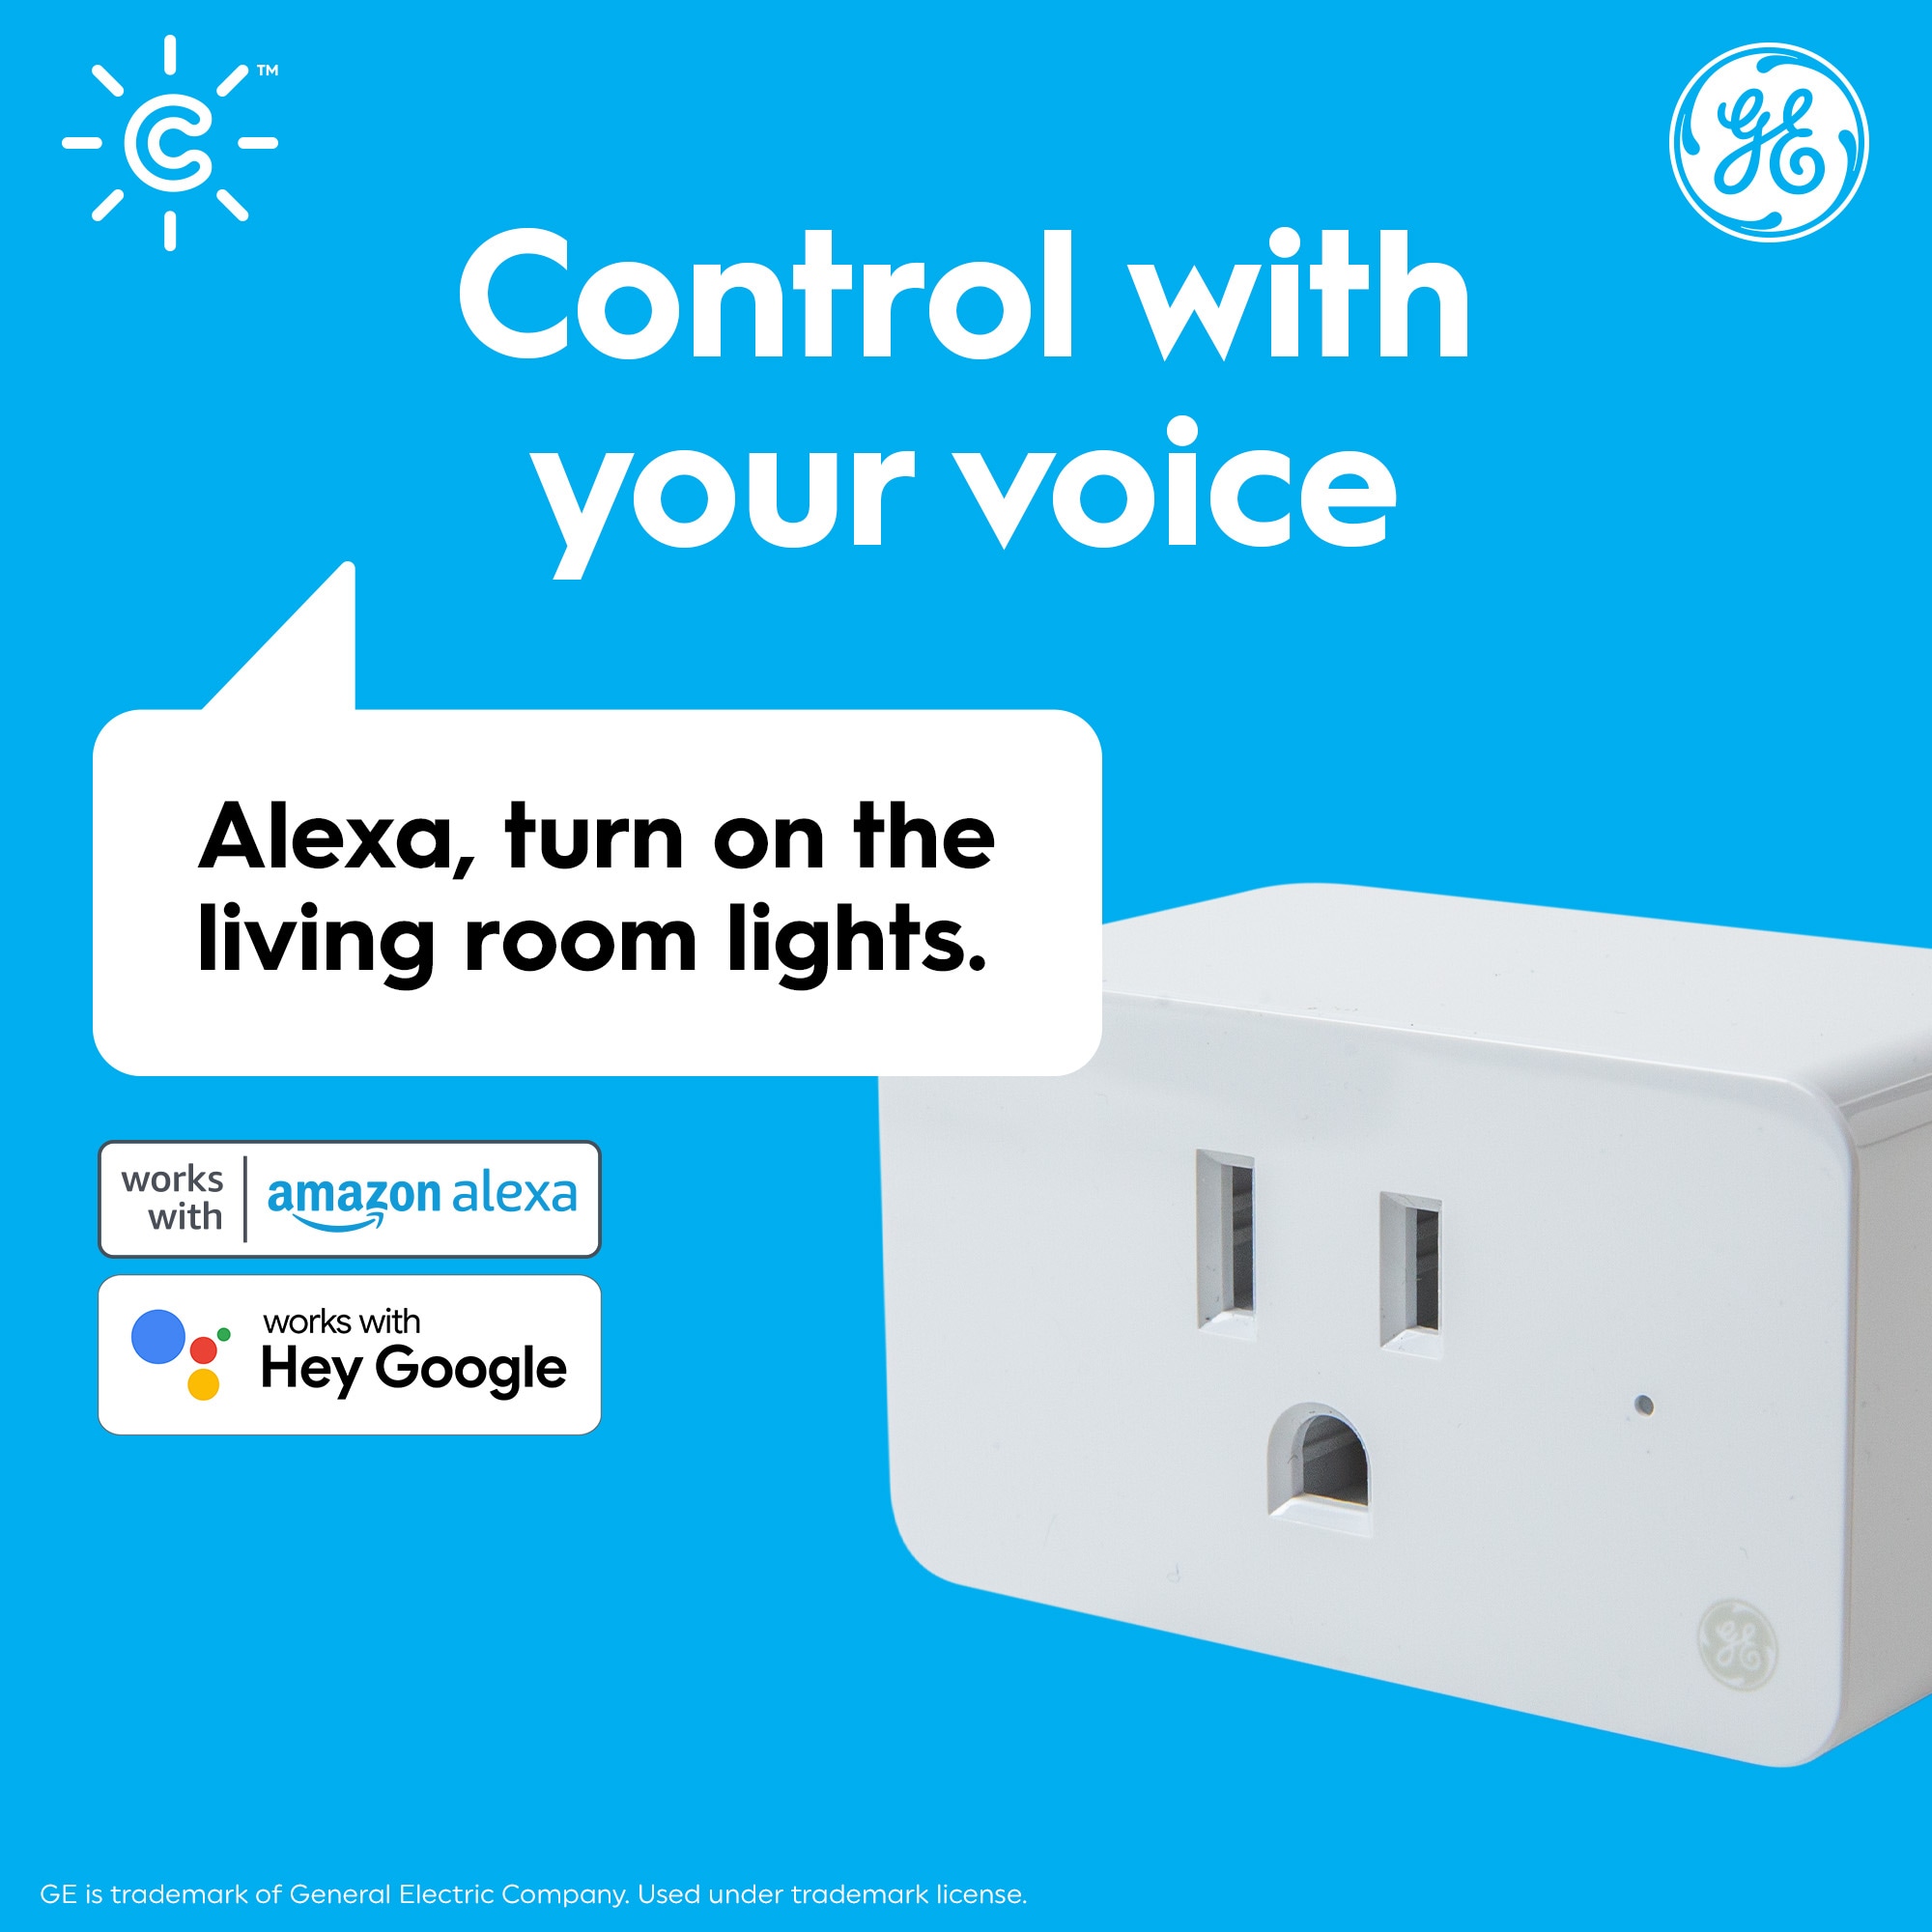 GE Lighting Cync Indoor Smart Plug 3 Pack, Bluetooth and Wi-Fi Outlet Socket